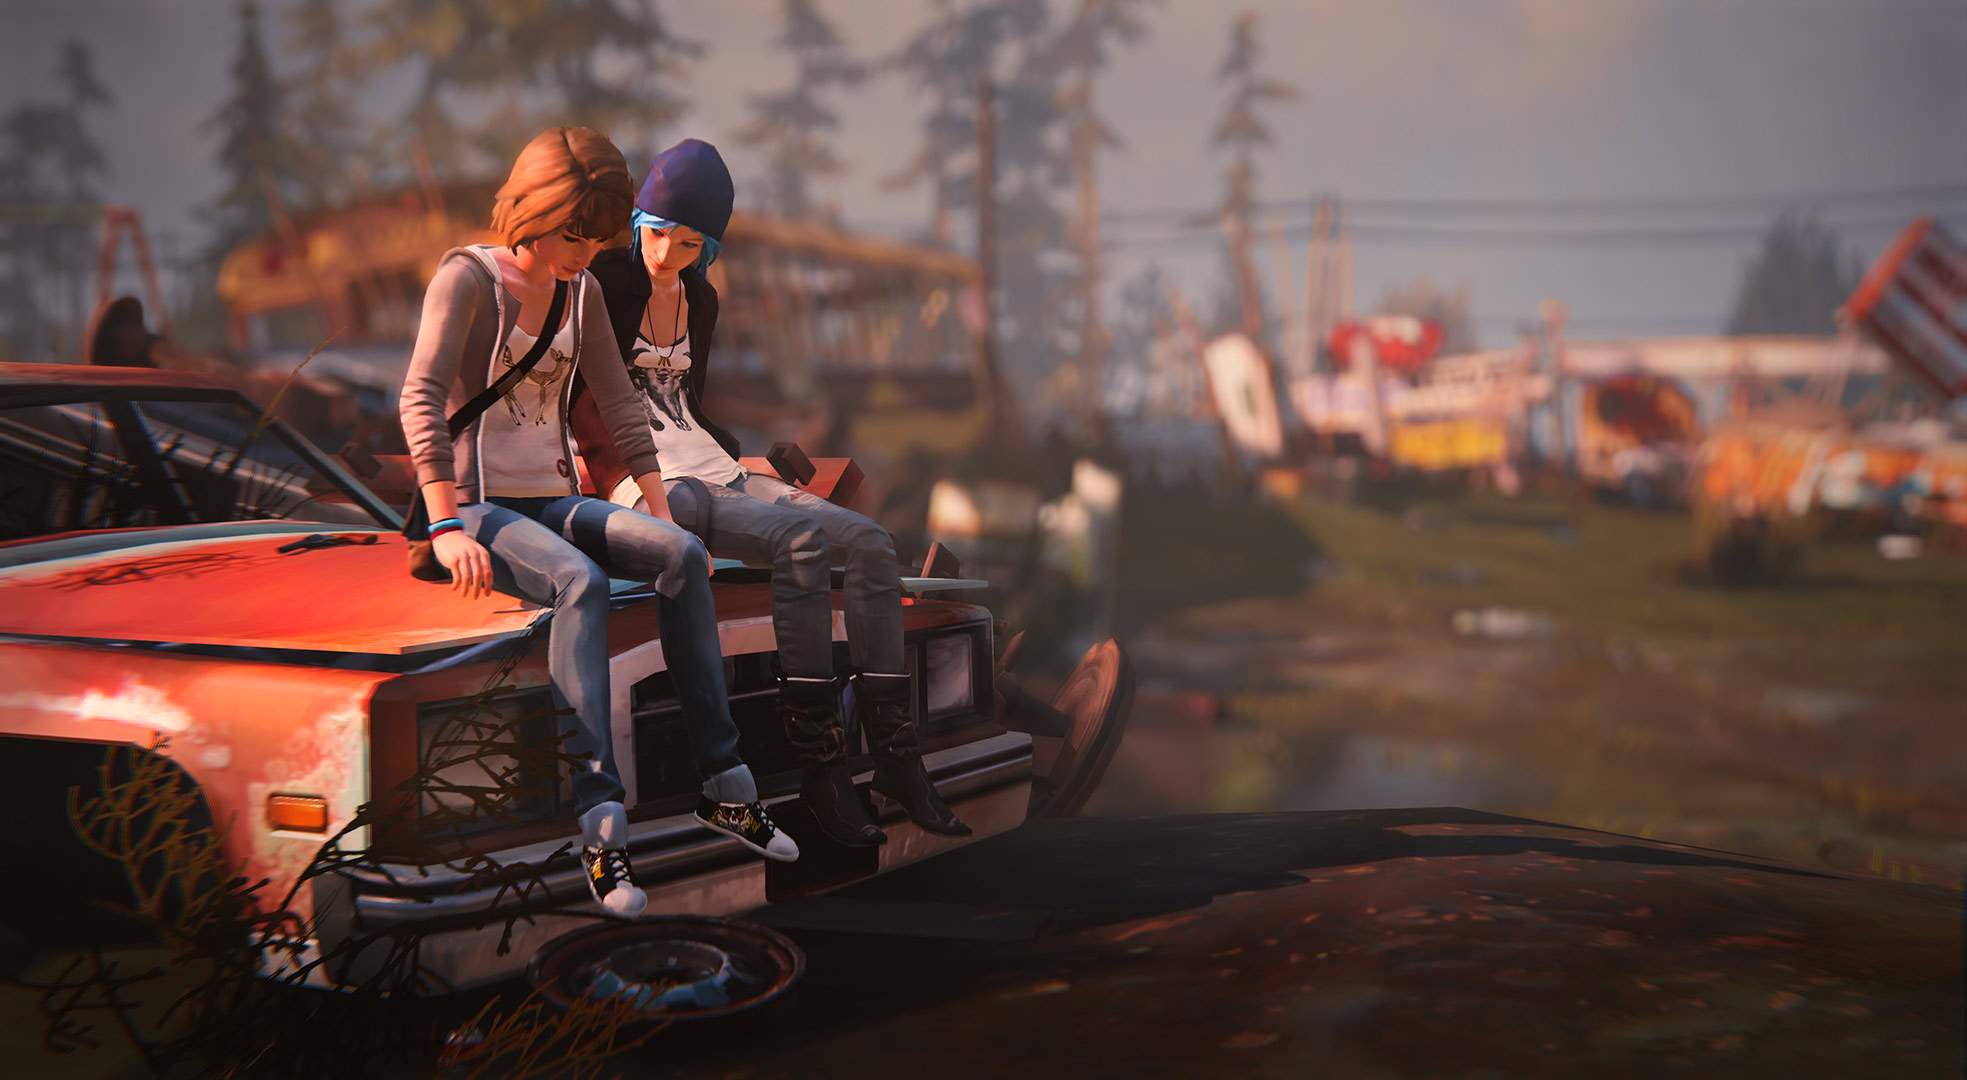 Afternoon in a grassy junkyard. Max and Chloe sit contemplatively on the hood of a rusted red sedan.